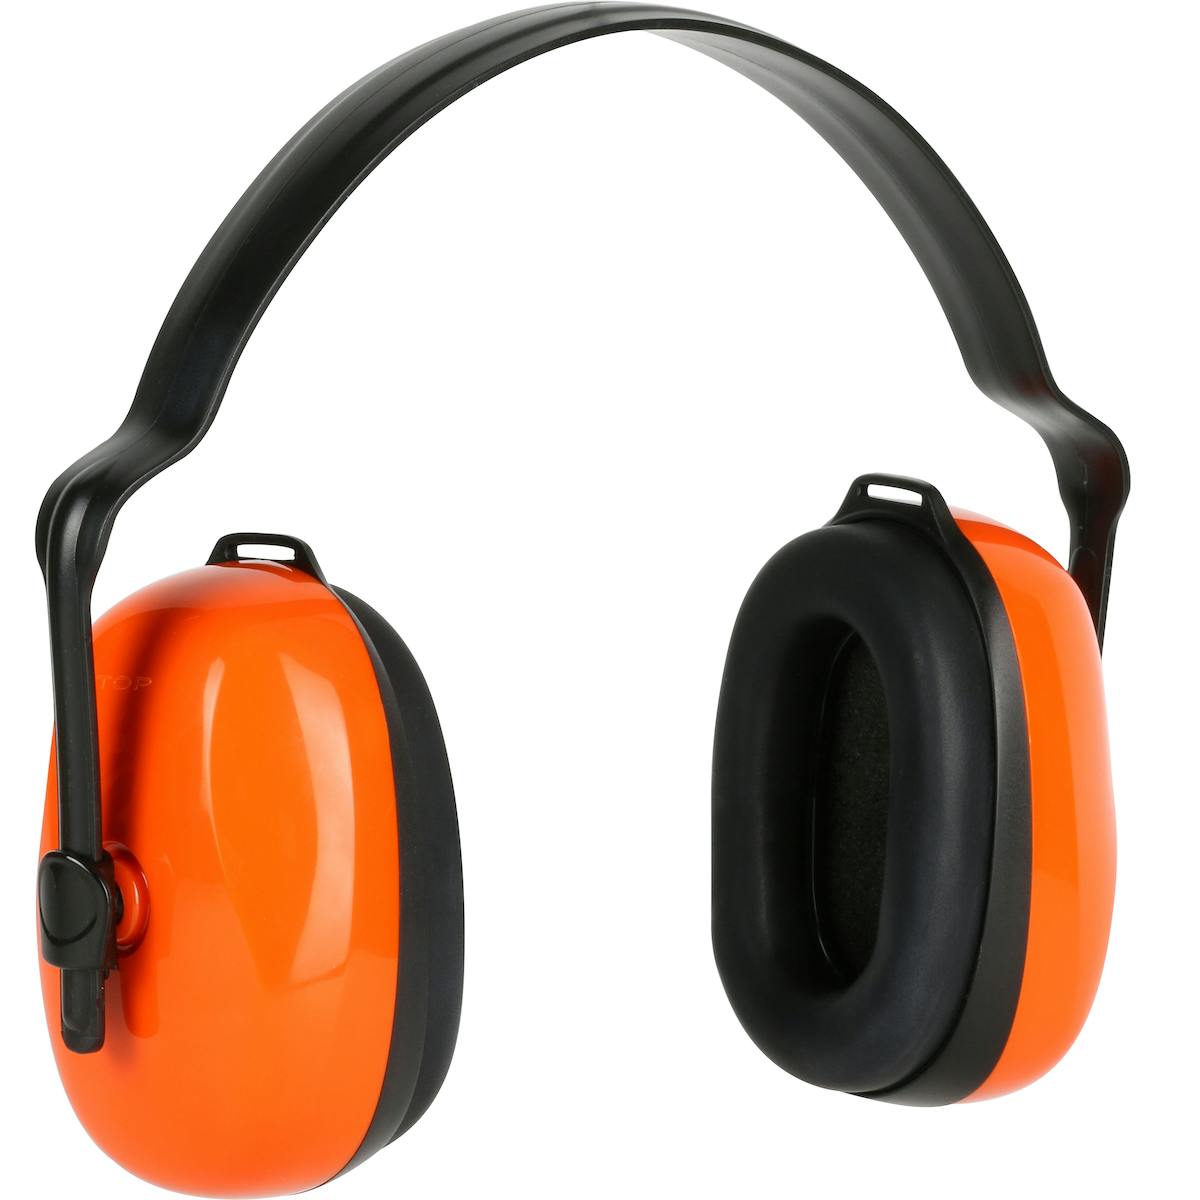 Passive Ear Muffs with Adjustable Headband - NRR 24, Orange (263-NP110) - OS